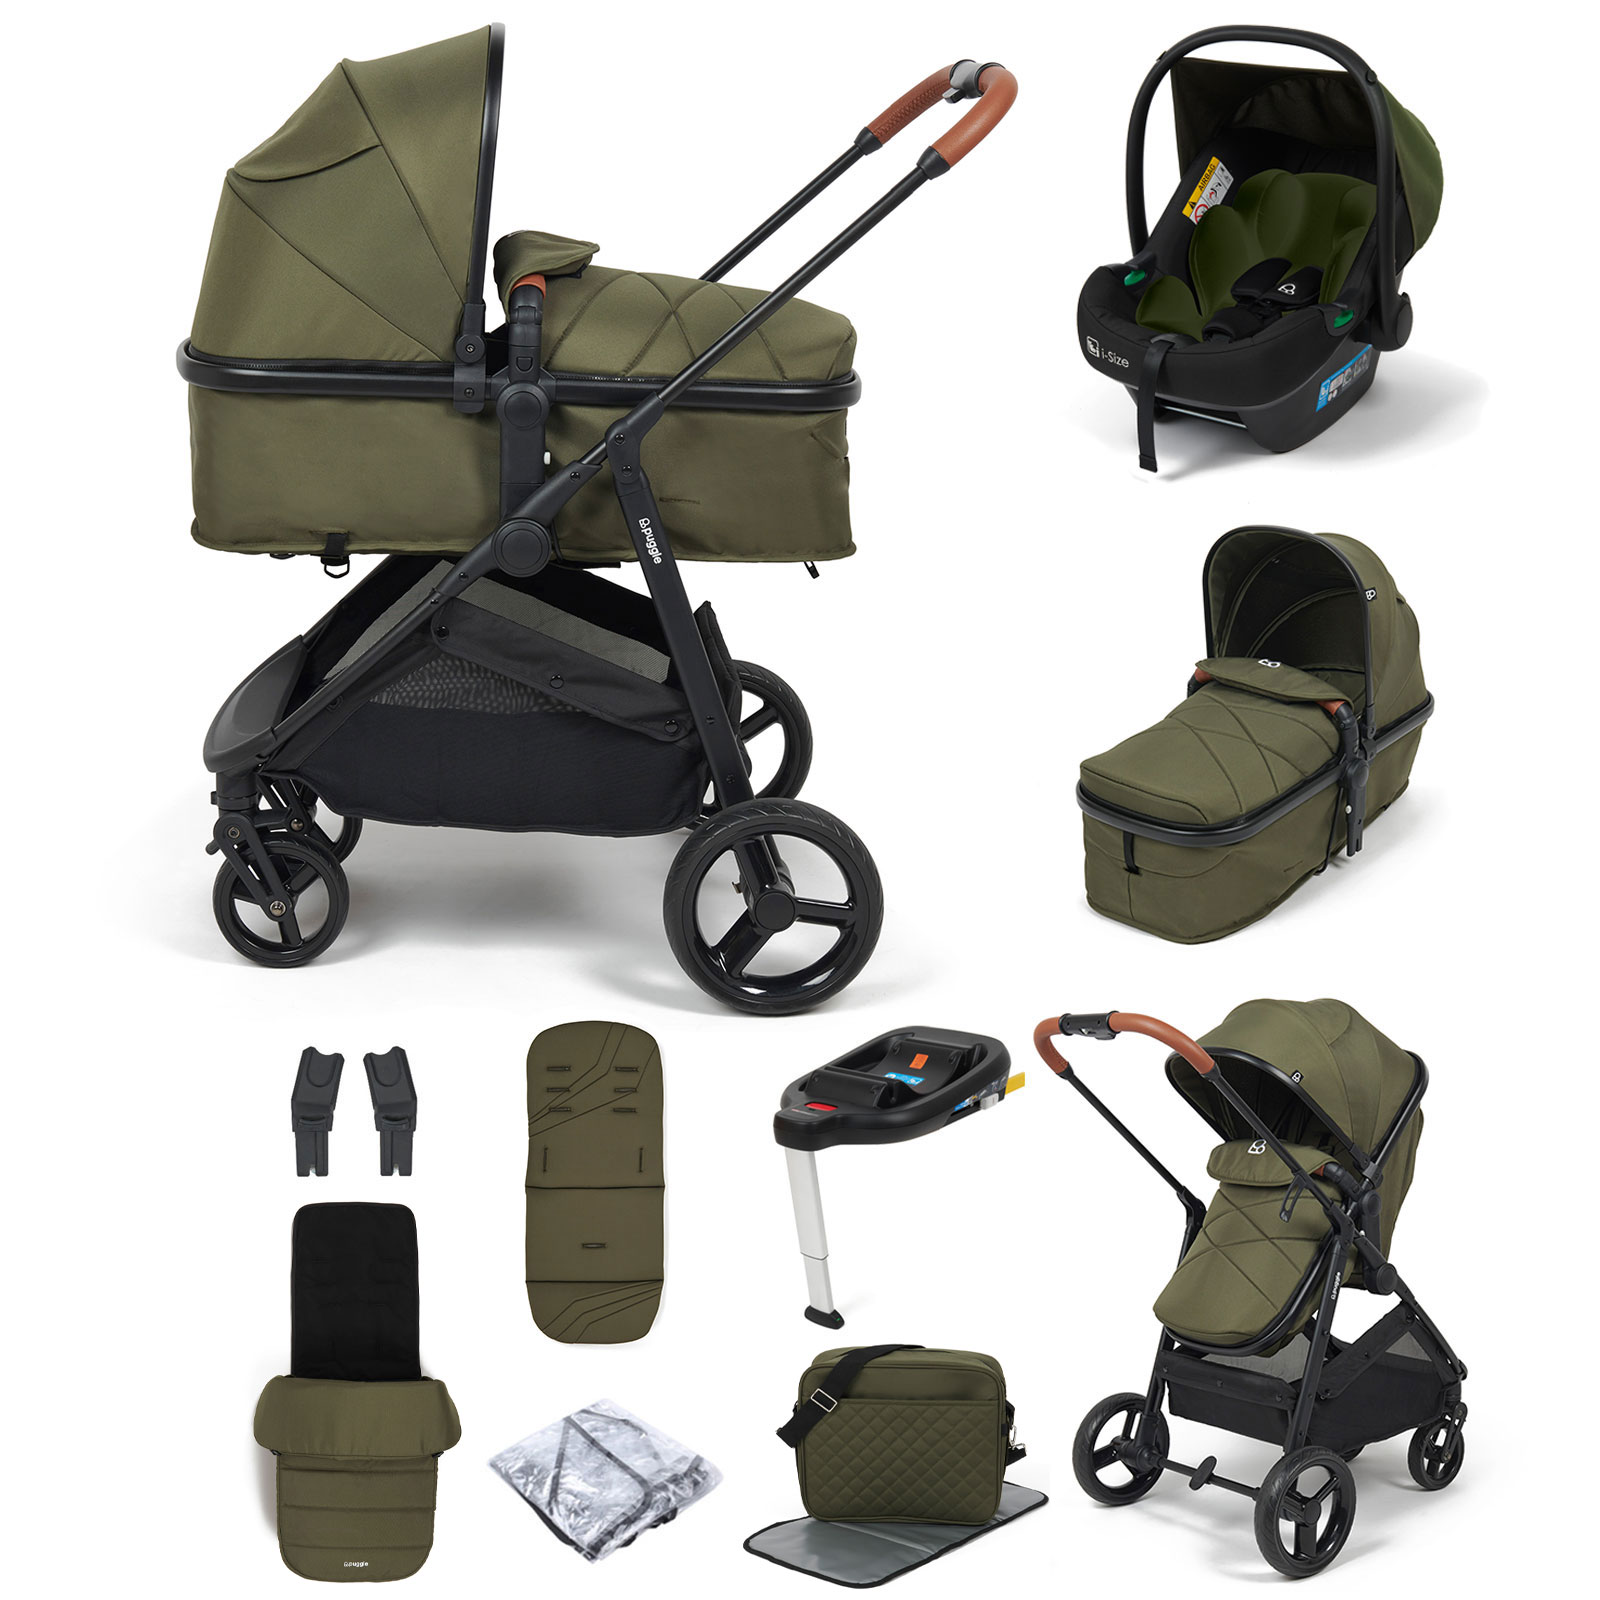 Puggle Monaco XT 2in1 i-Size Travel System with ISOFIX Base, Footmuff & Changing Bag - Forest Green